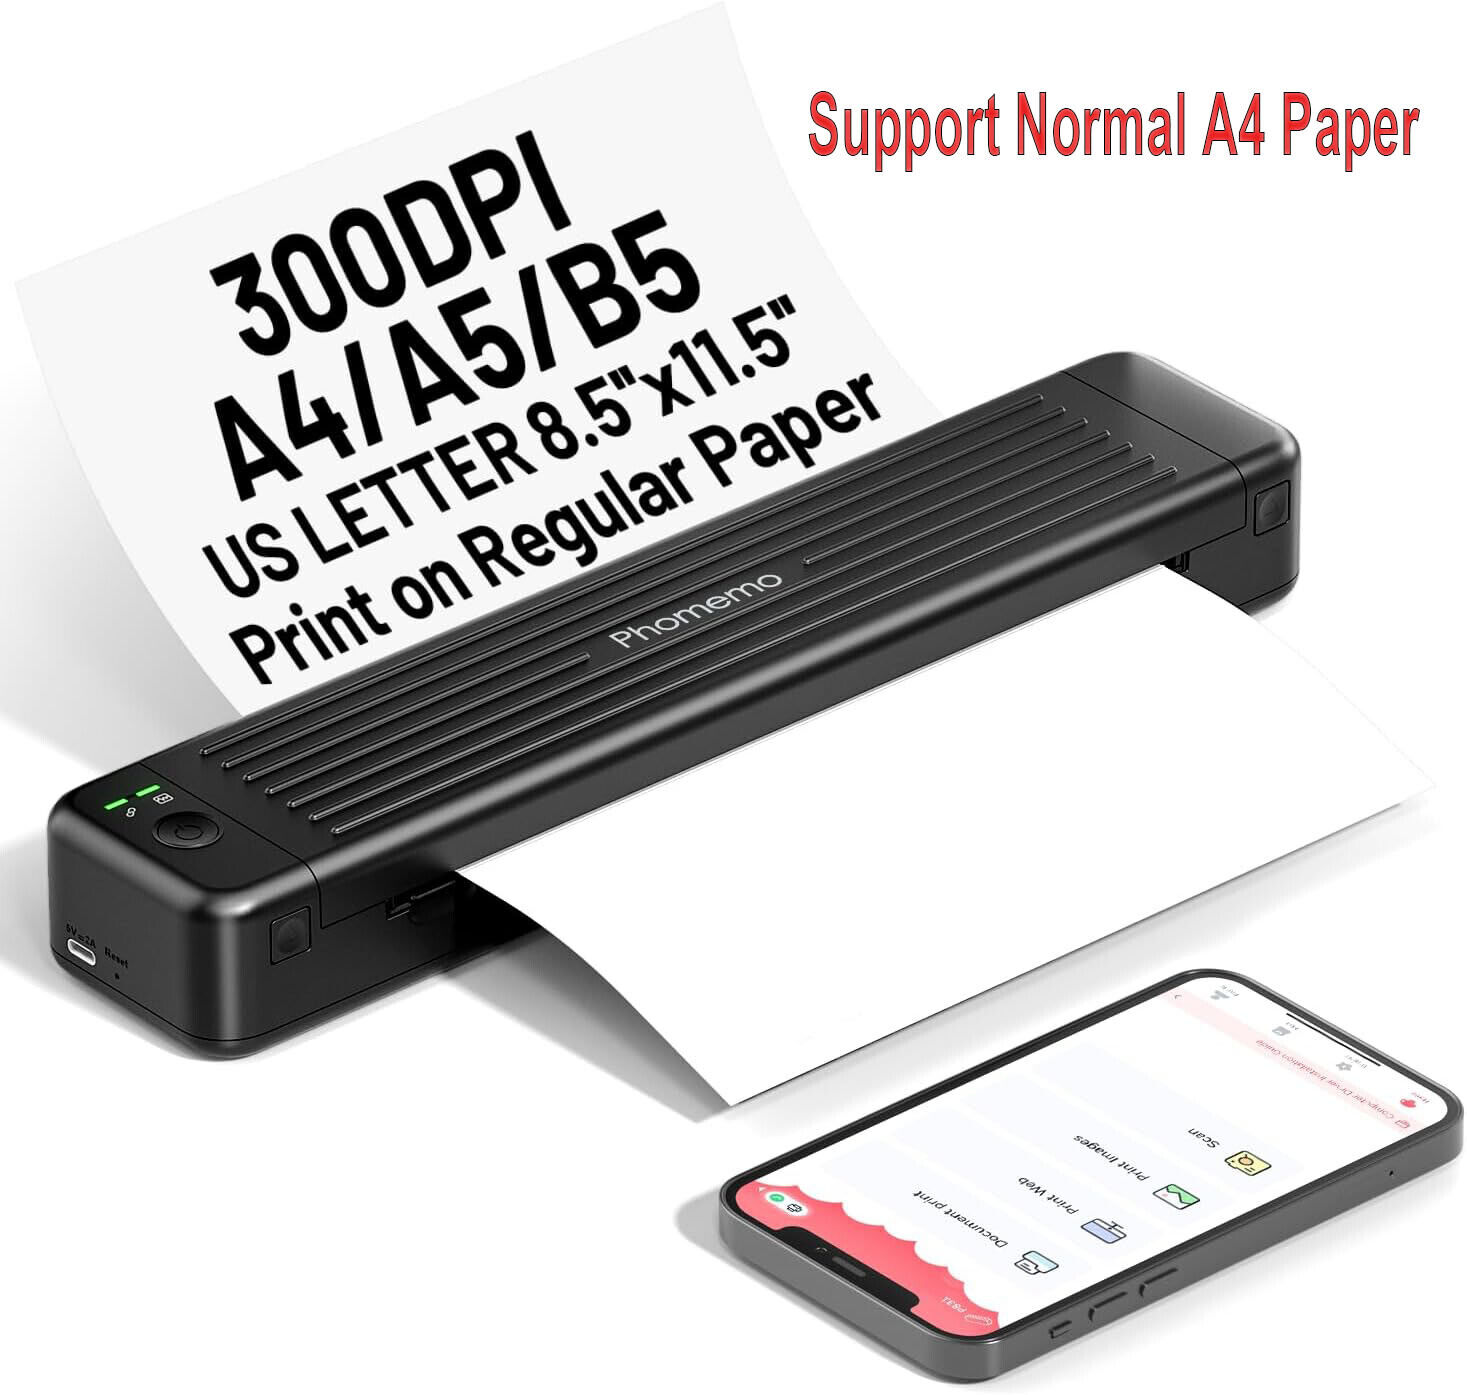 Phomemo P831 Portable Bluetooth Thermal Transfer Printer Support Regular A4 Pape